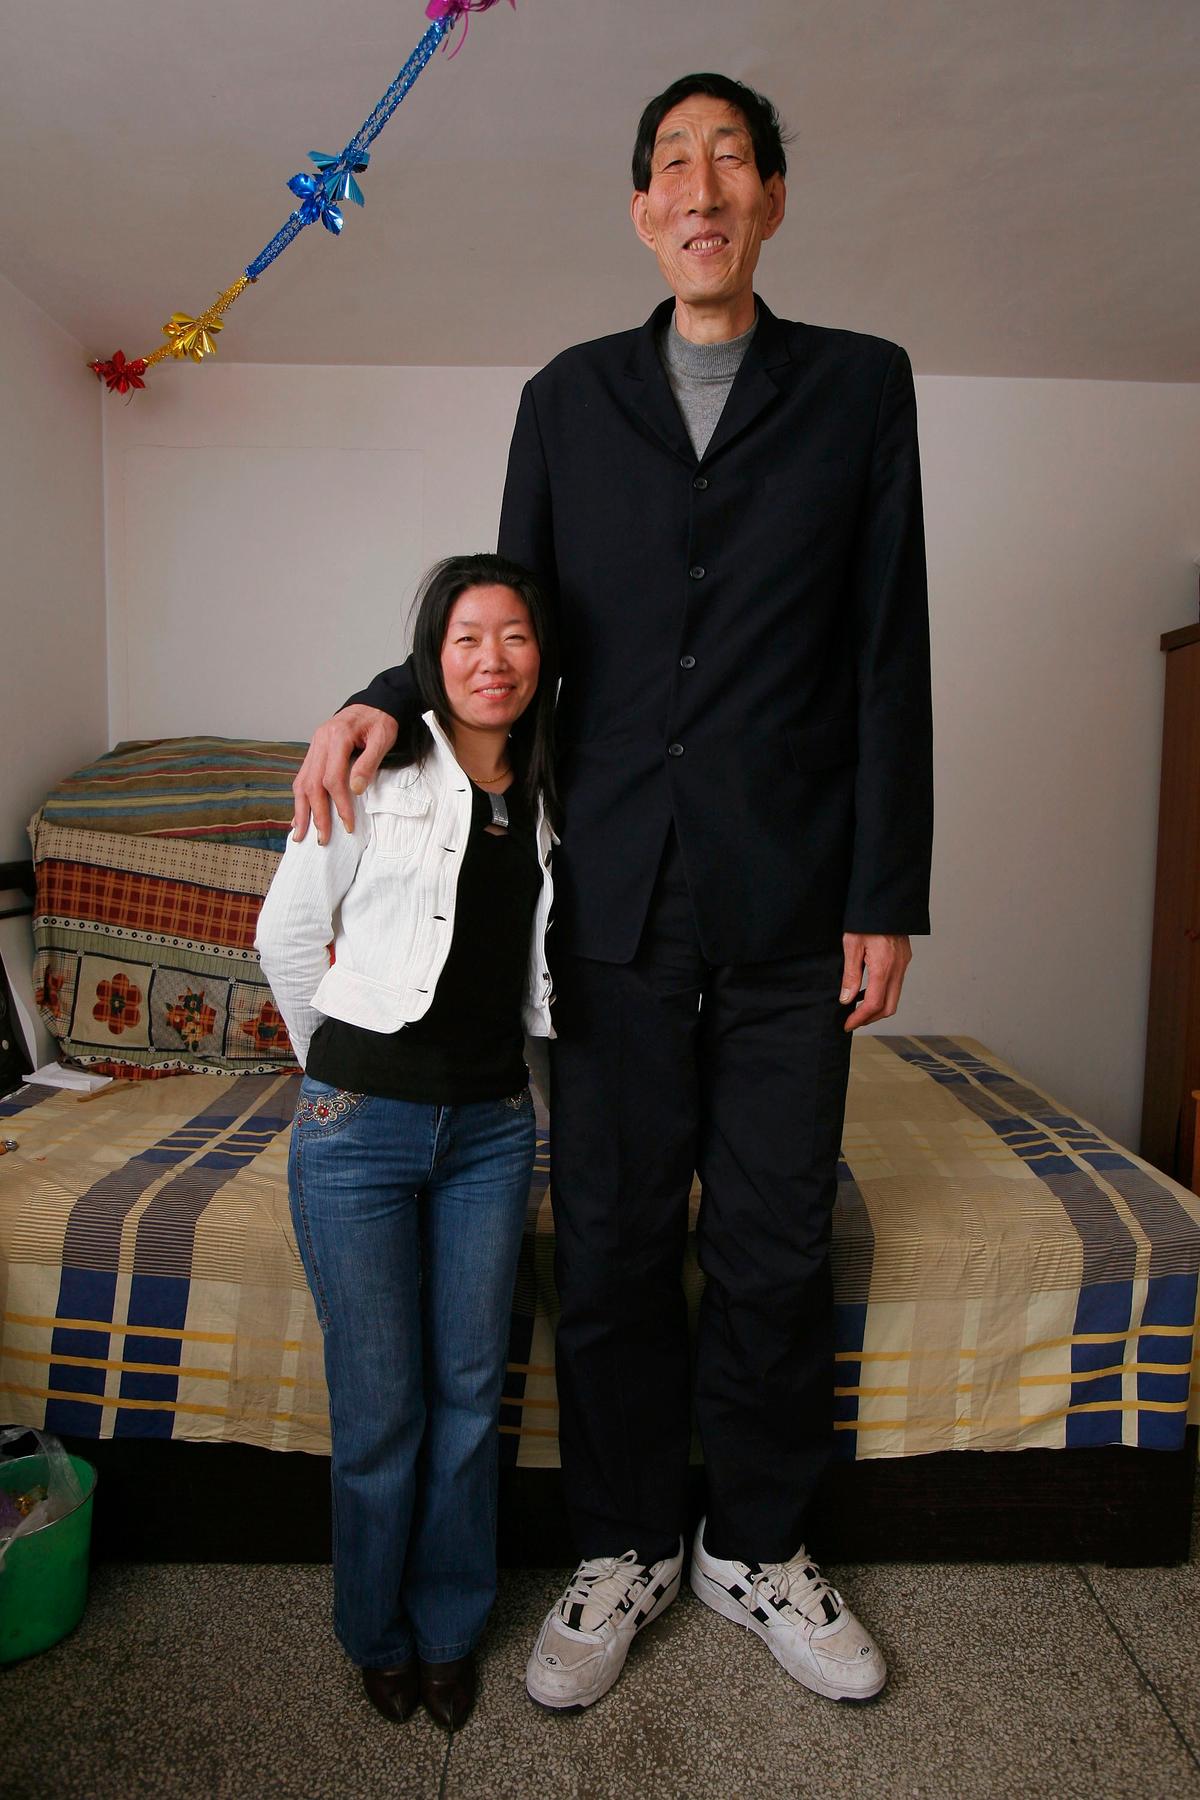 Formerly the world's tallest man, Bao Xishun (R) poses for a photo with his bride Xia Shujuan at home on March 30, 2007, in Chifeng of Inner Mongolia Autonomous Region, China.  (China Photos/Getty Images)